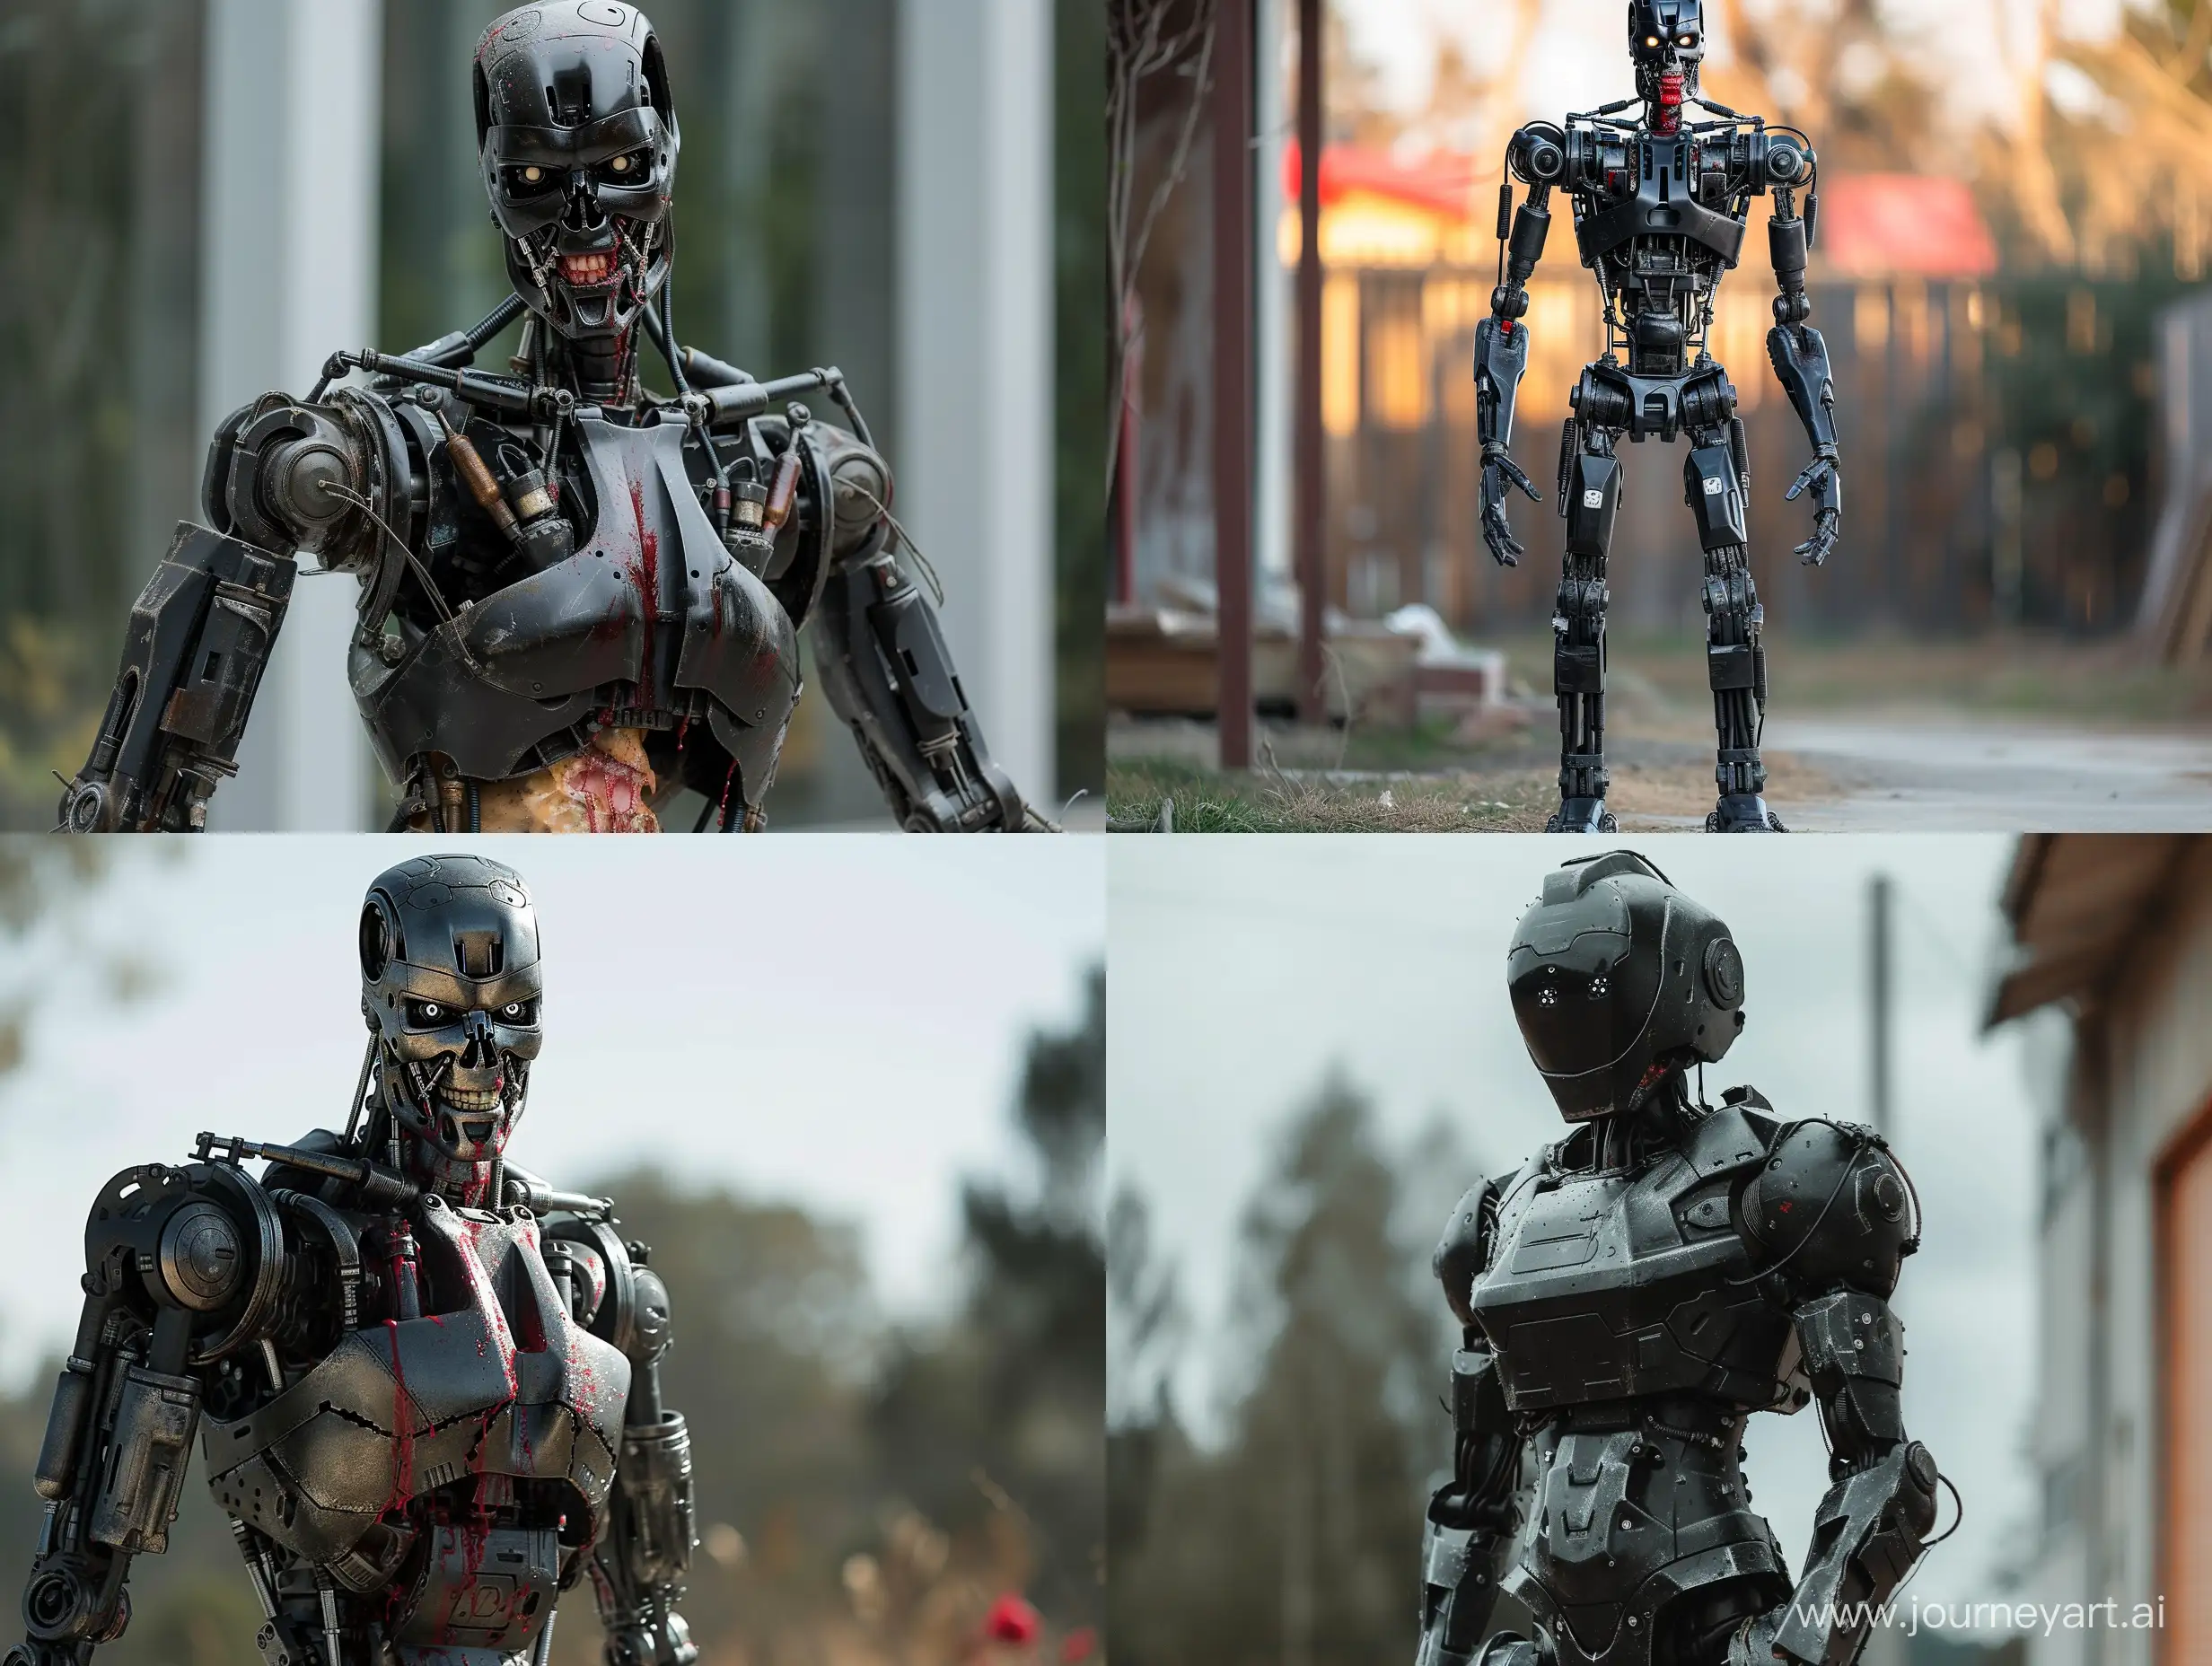 An image featuring a killer robot, providing a full view, standing outside, gore, style raw, horror,

